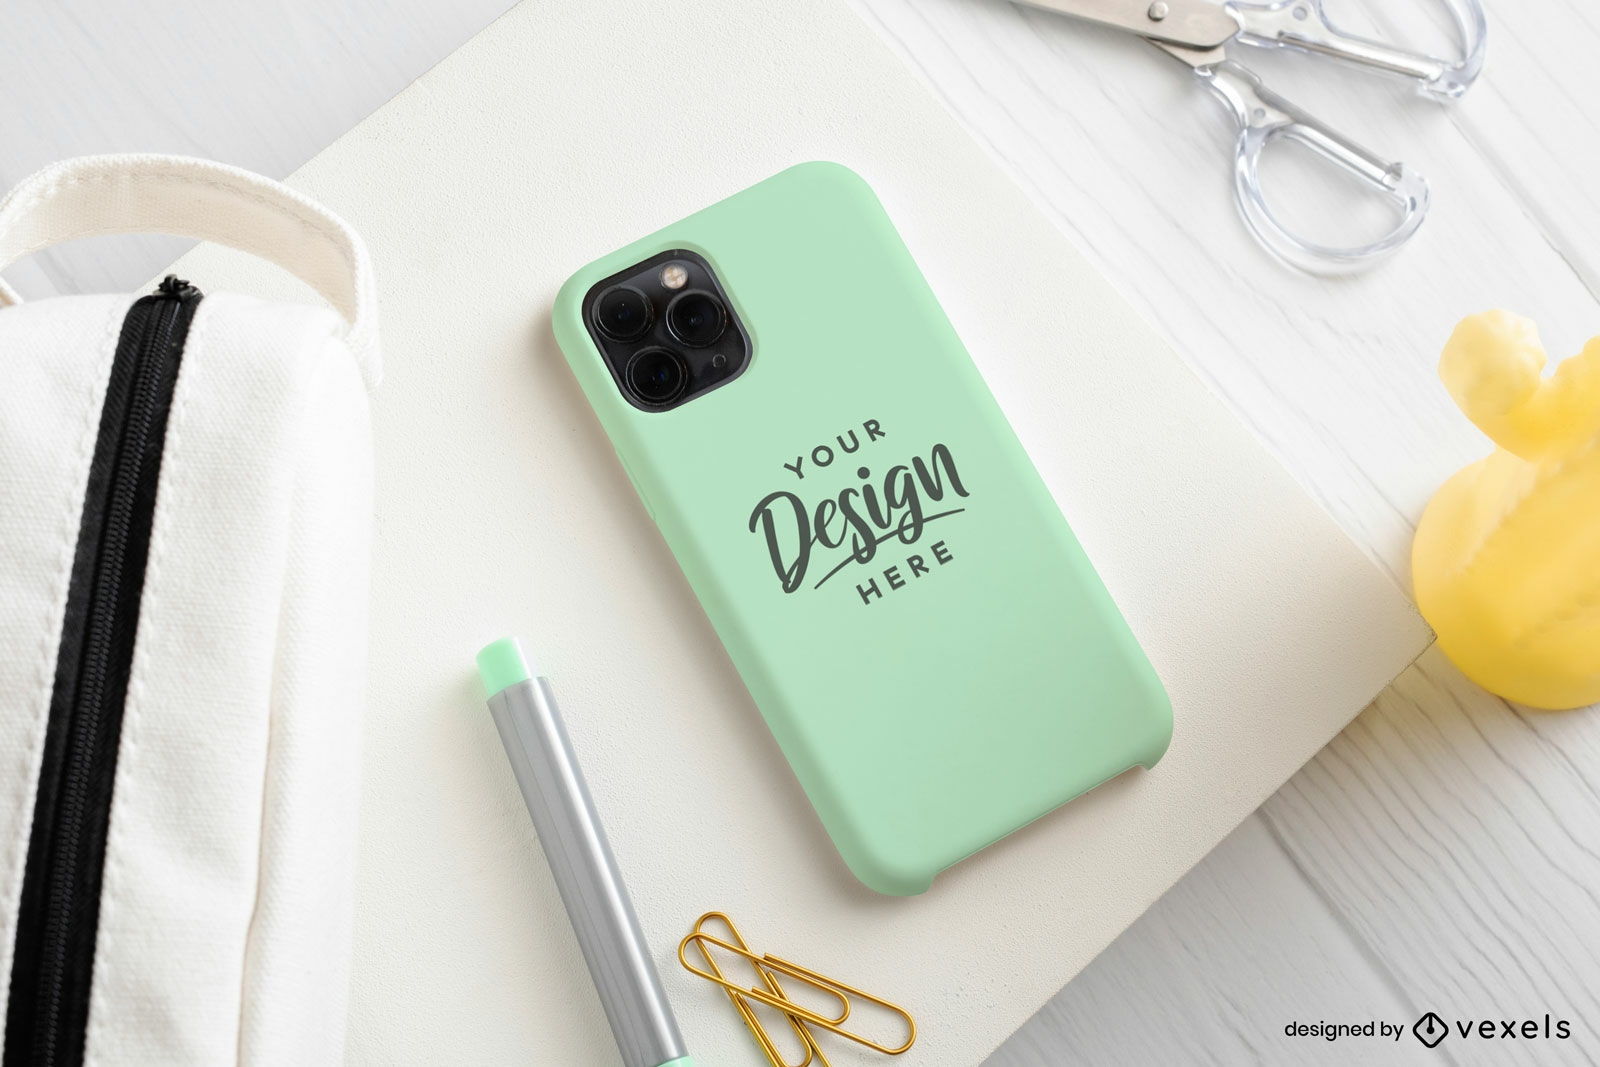 Light green phone case mockup in table